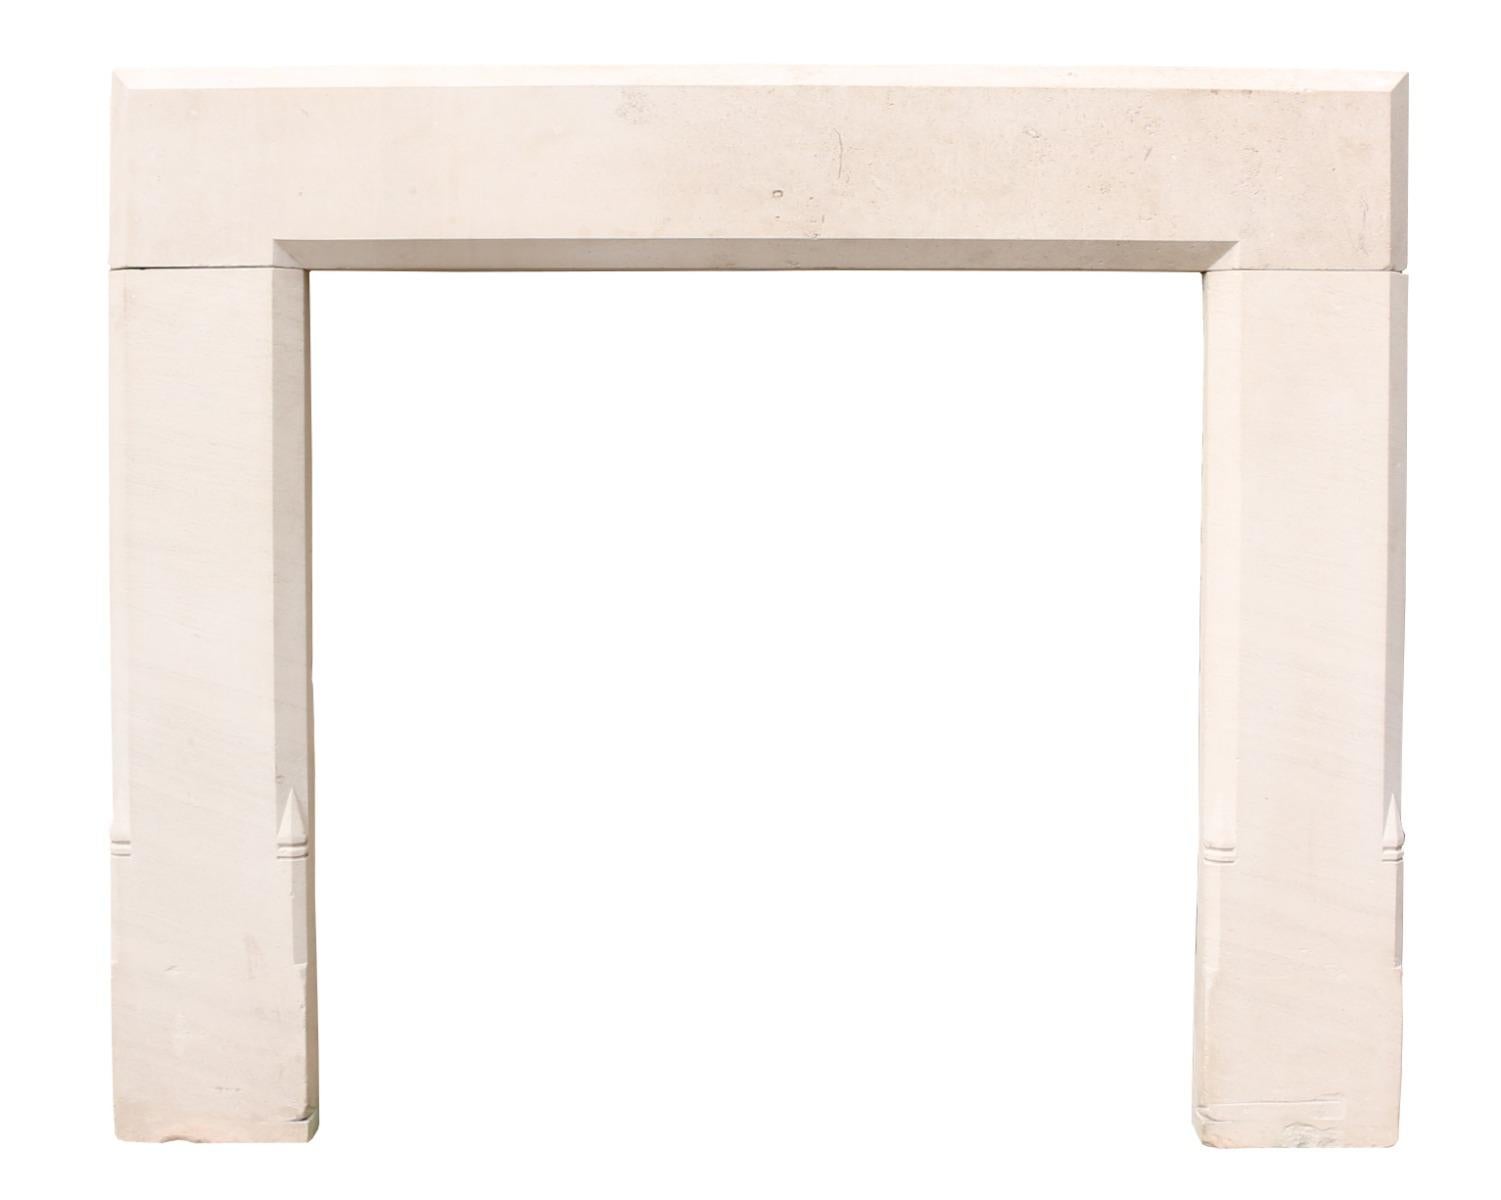 A handsome pale limestone chimney-piece, reclaimed from a property in Dorset.

Opening Height 104.5 cm (41.14 in)

Opening Width 106.5 cm (41.92 in)